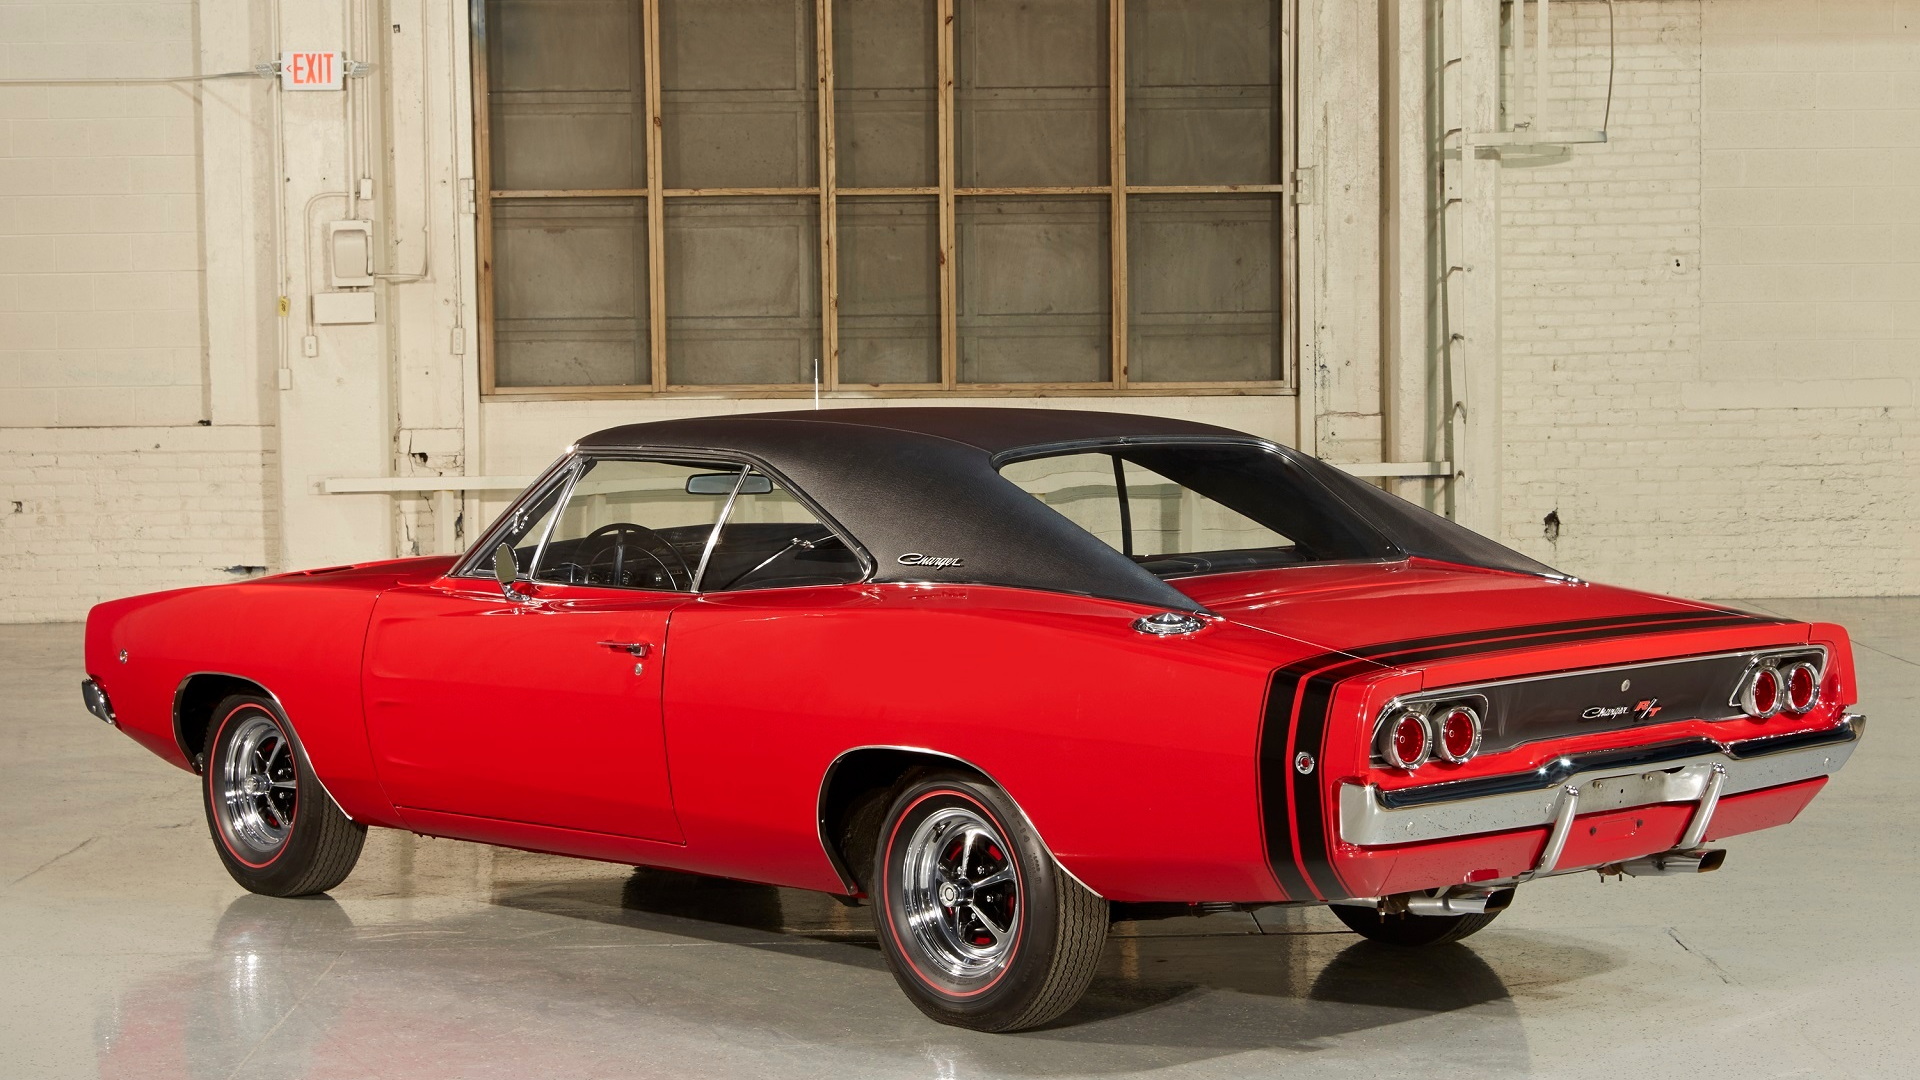 1968 Dodge Charger, Dodge Heritage Collection